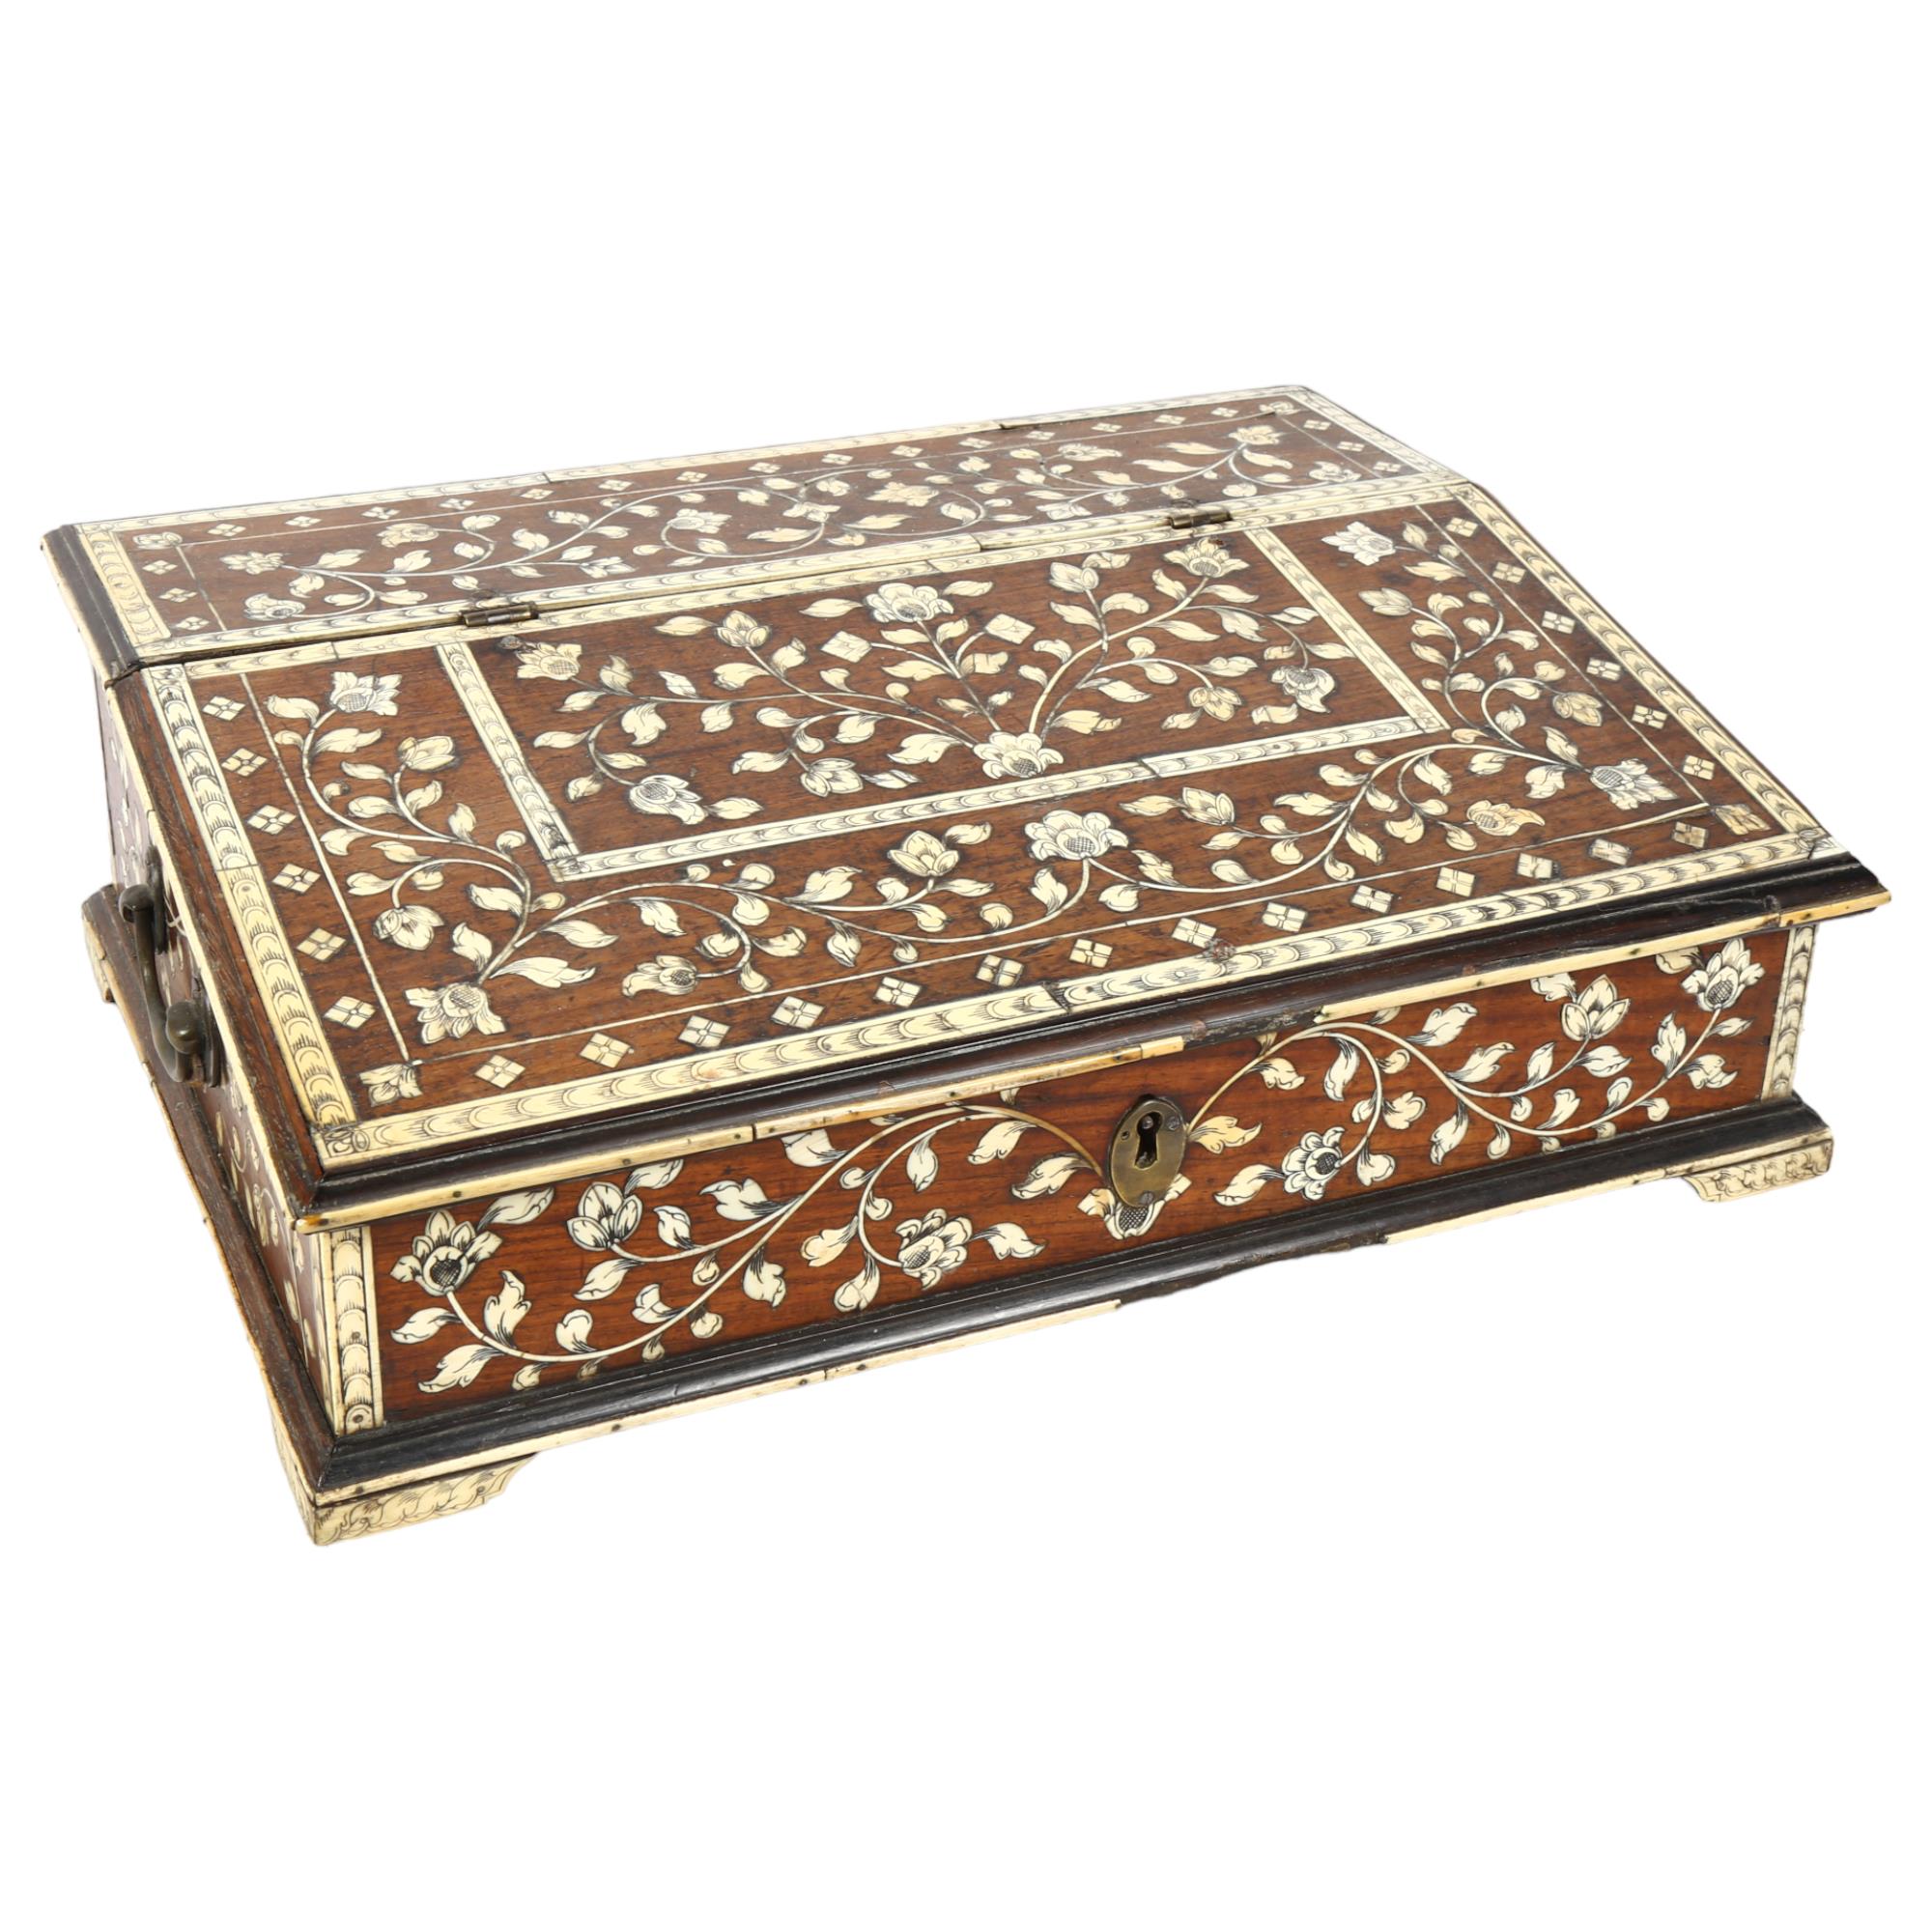 A 19th century Indo-Portuguese writing box, teak and floral ivory inlaid, the rising top revealing